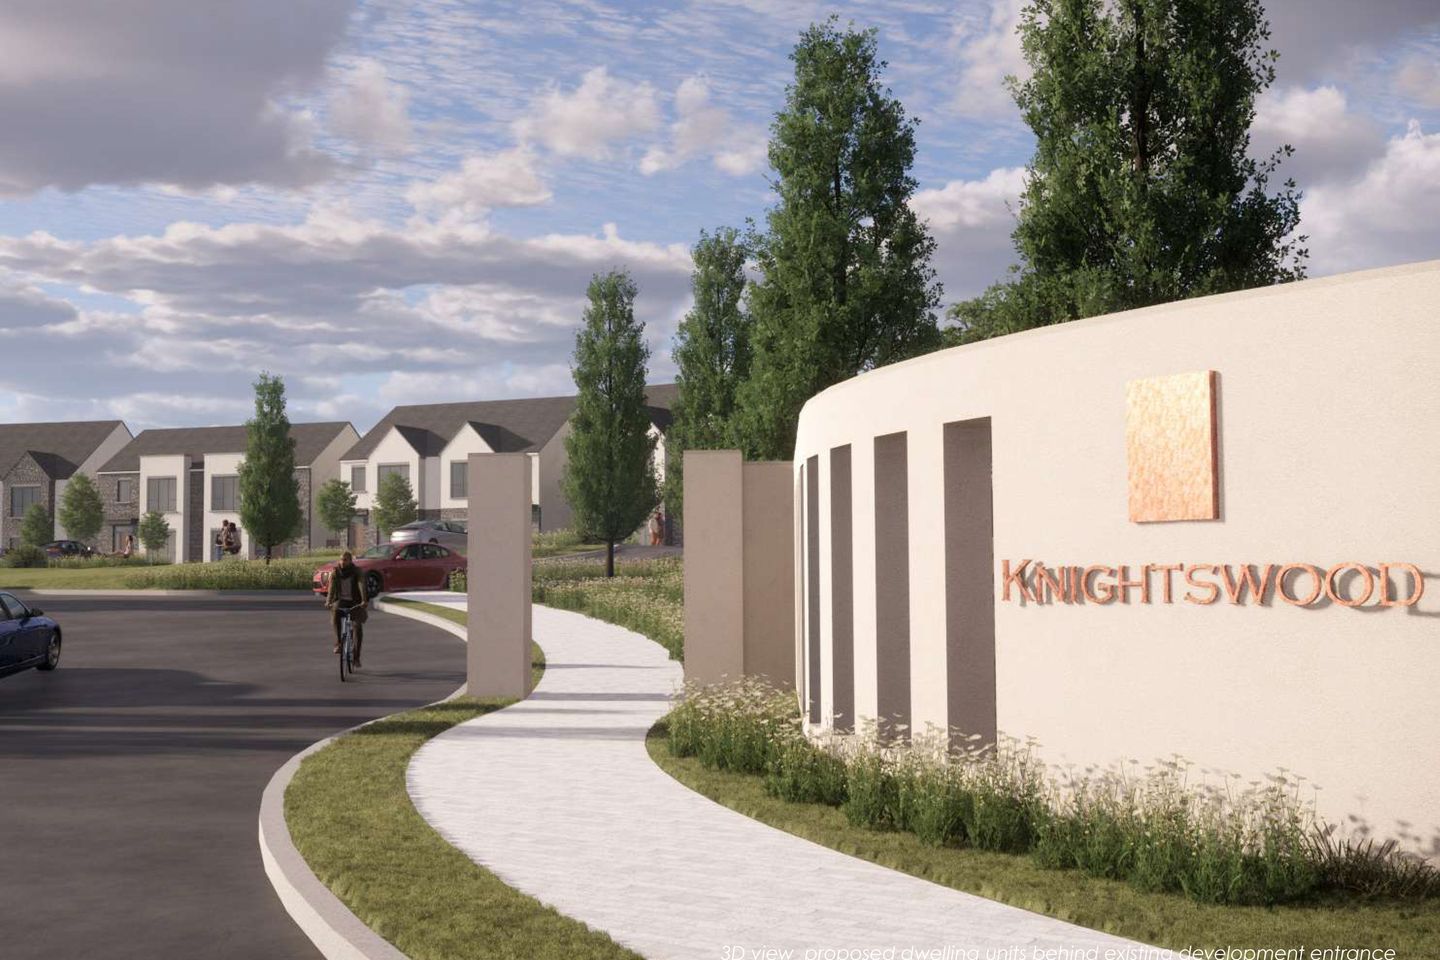 Knightswood, Phase 2, Williamstown, Waterford City, Co. Waterford